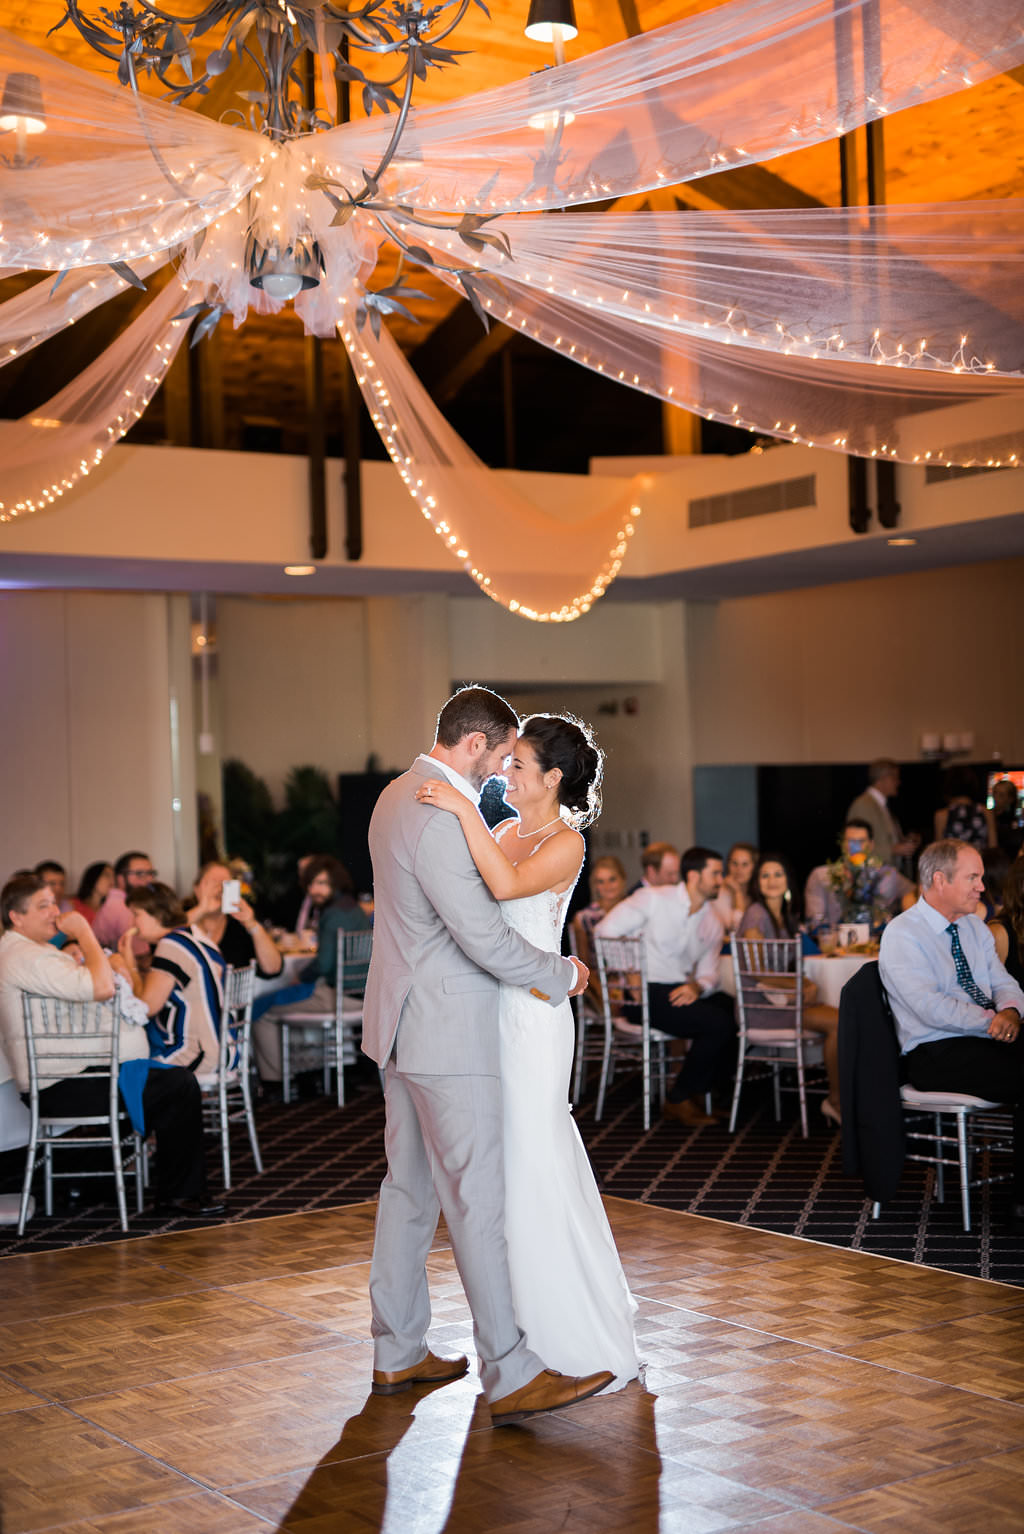 Bride and Groom First Dance Wedding Portrait | Tampa Bay Wedding Photographer Kera Photography | Venue St. Petersburg Country Club